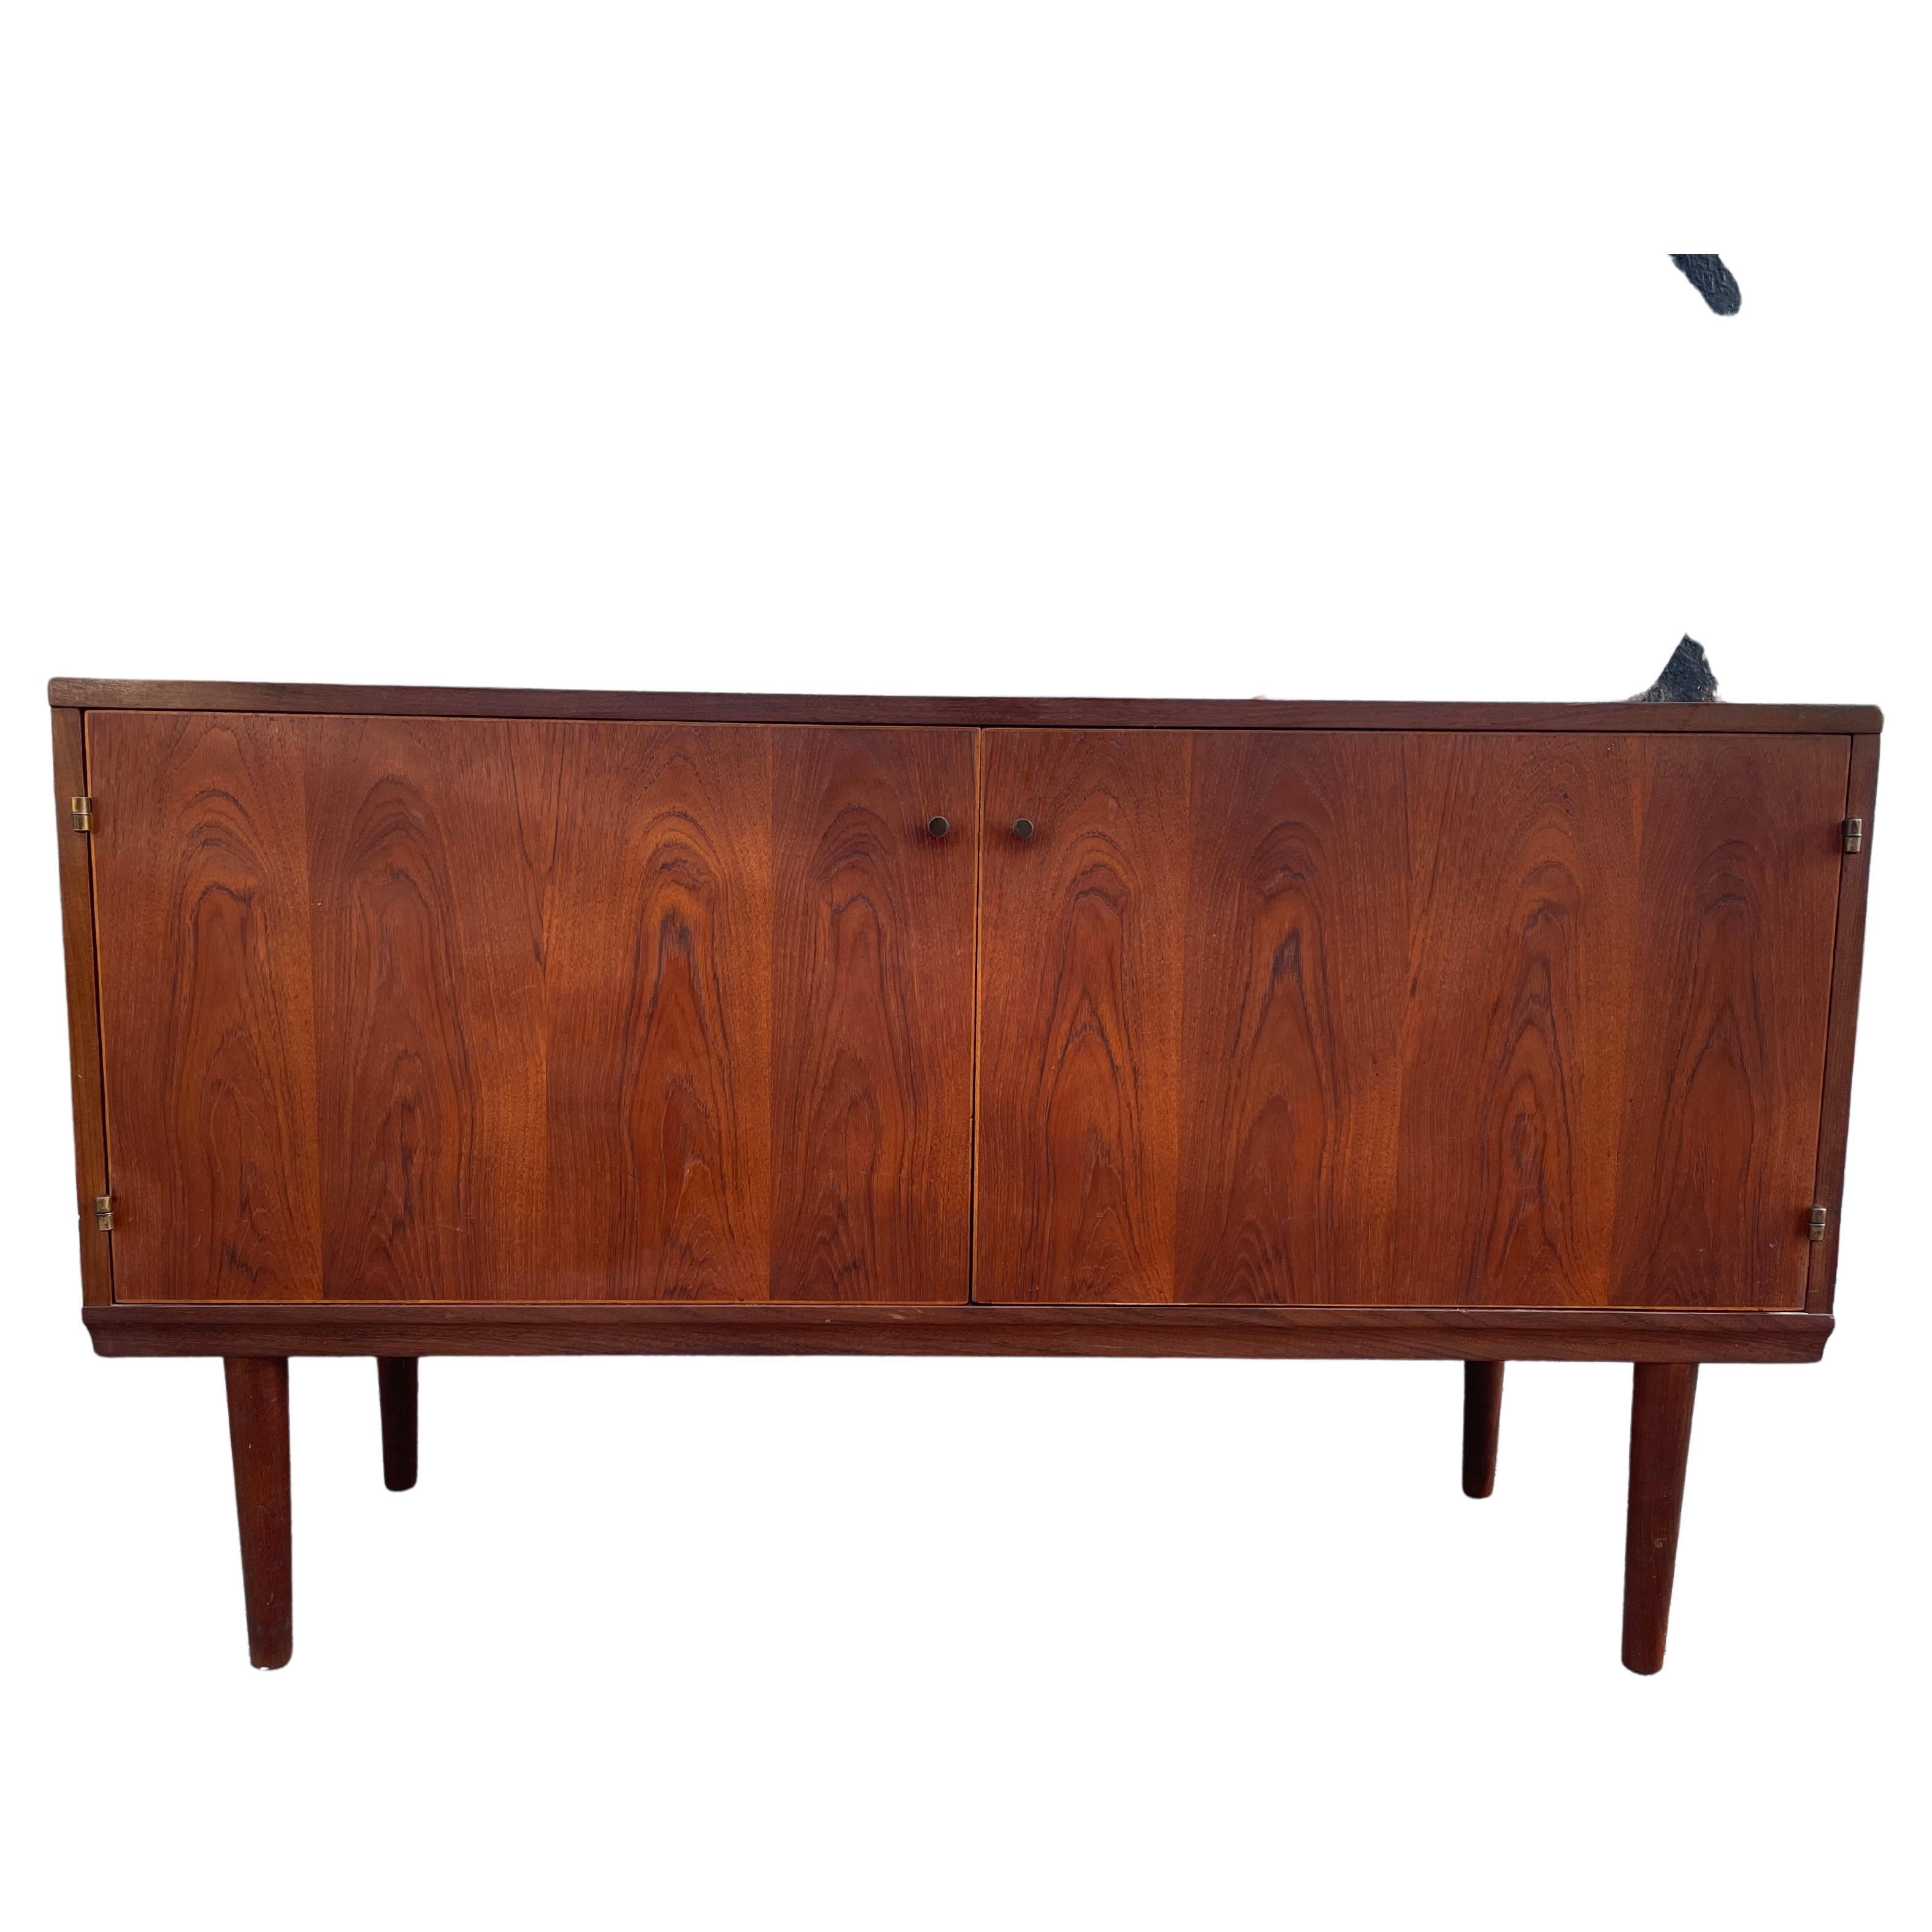 Rare Mid-Century Modern credenza finely crafted by LH mobler designed by Hans Olsen. All teak wood construction has (2) front cabinet doors with brass knobs and hinges. Has (2) adjustable shelves inside with (1) small drawer. Sits on (4) solid teak